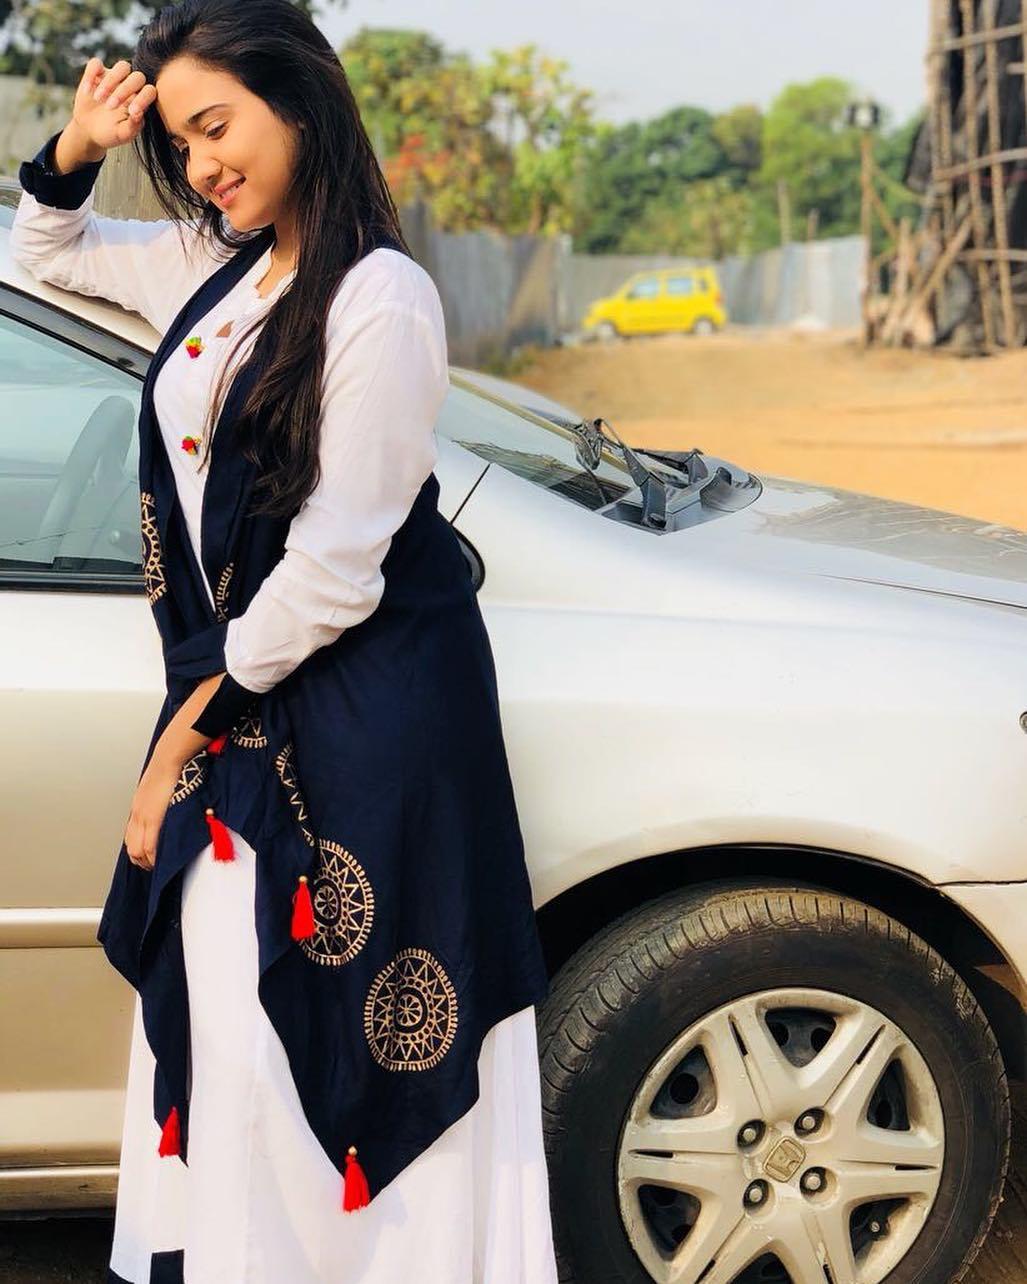 Times Ashi Singh Wowed Us With Her Casual Cool Look!